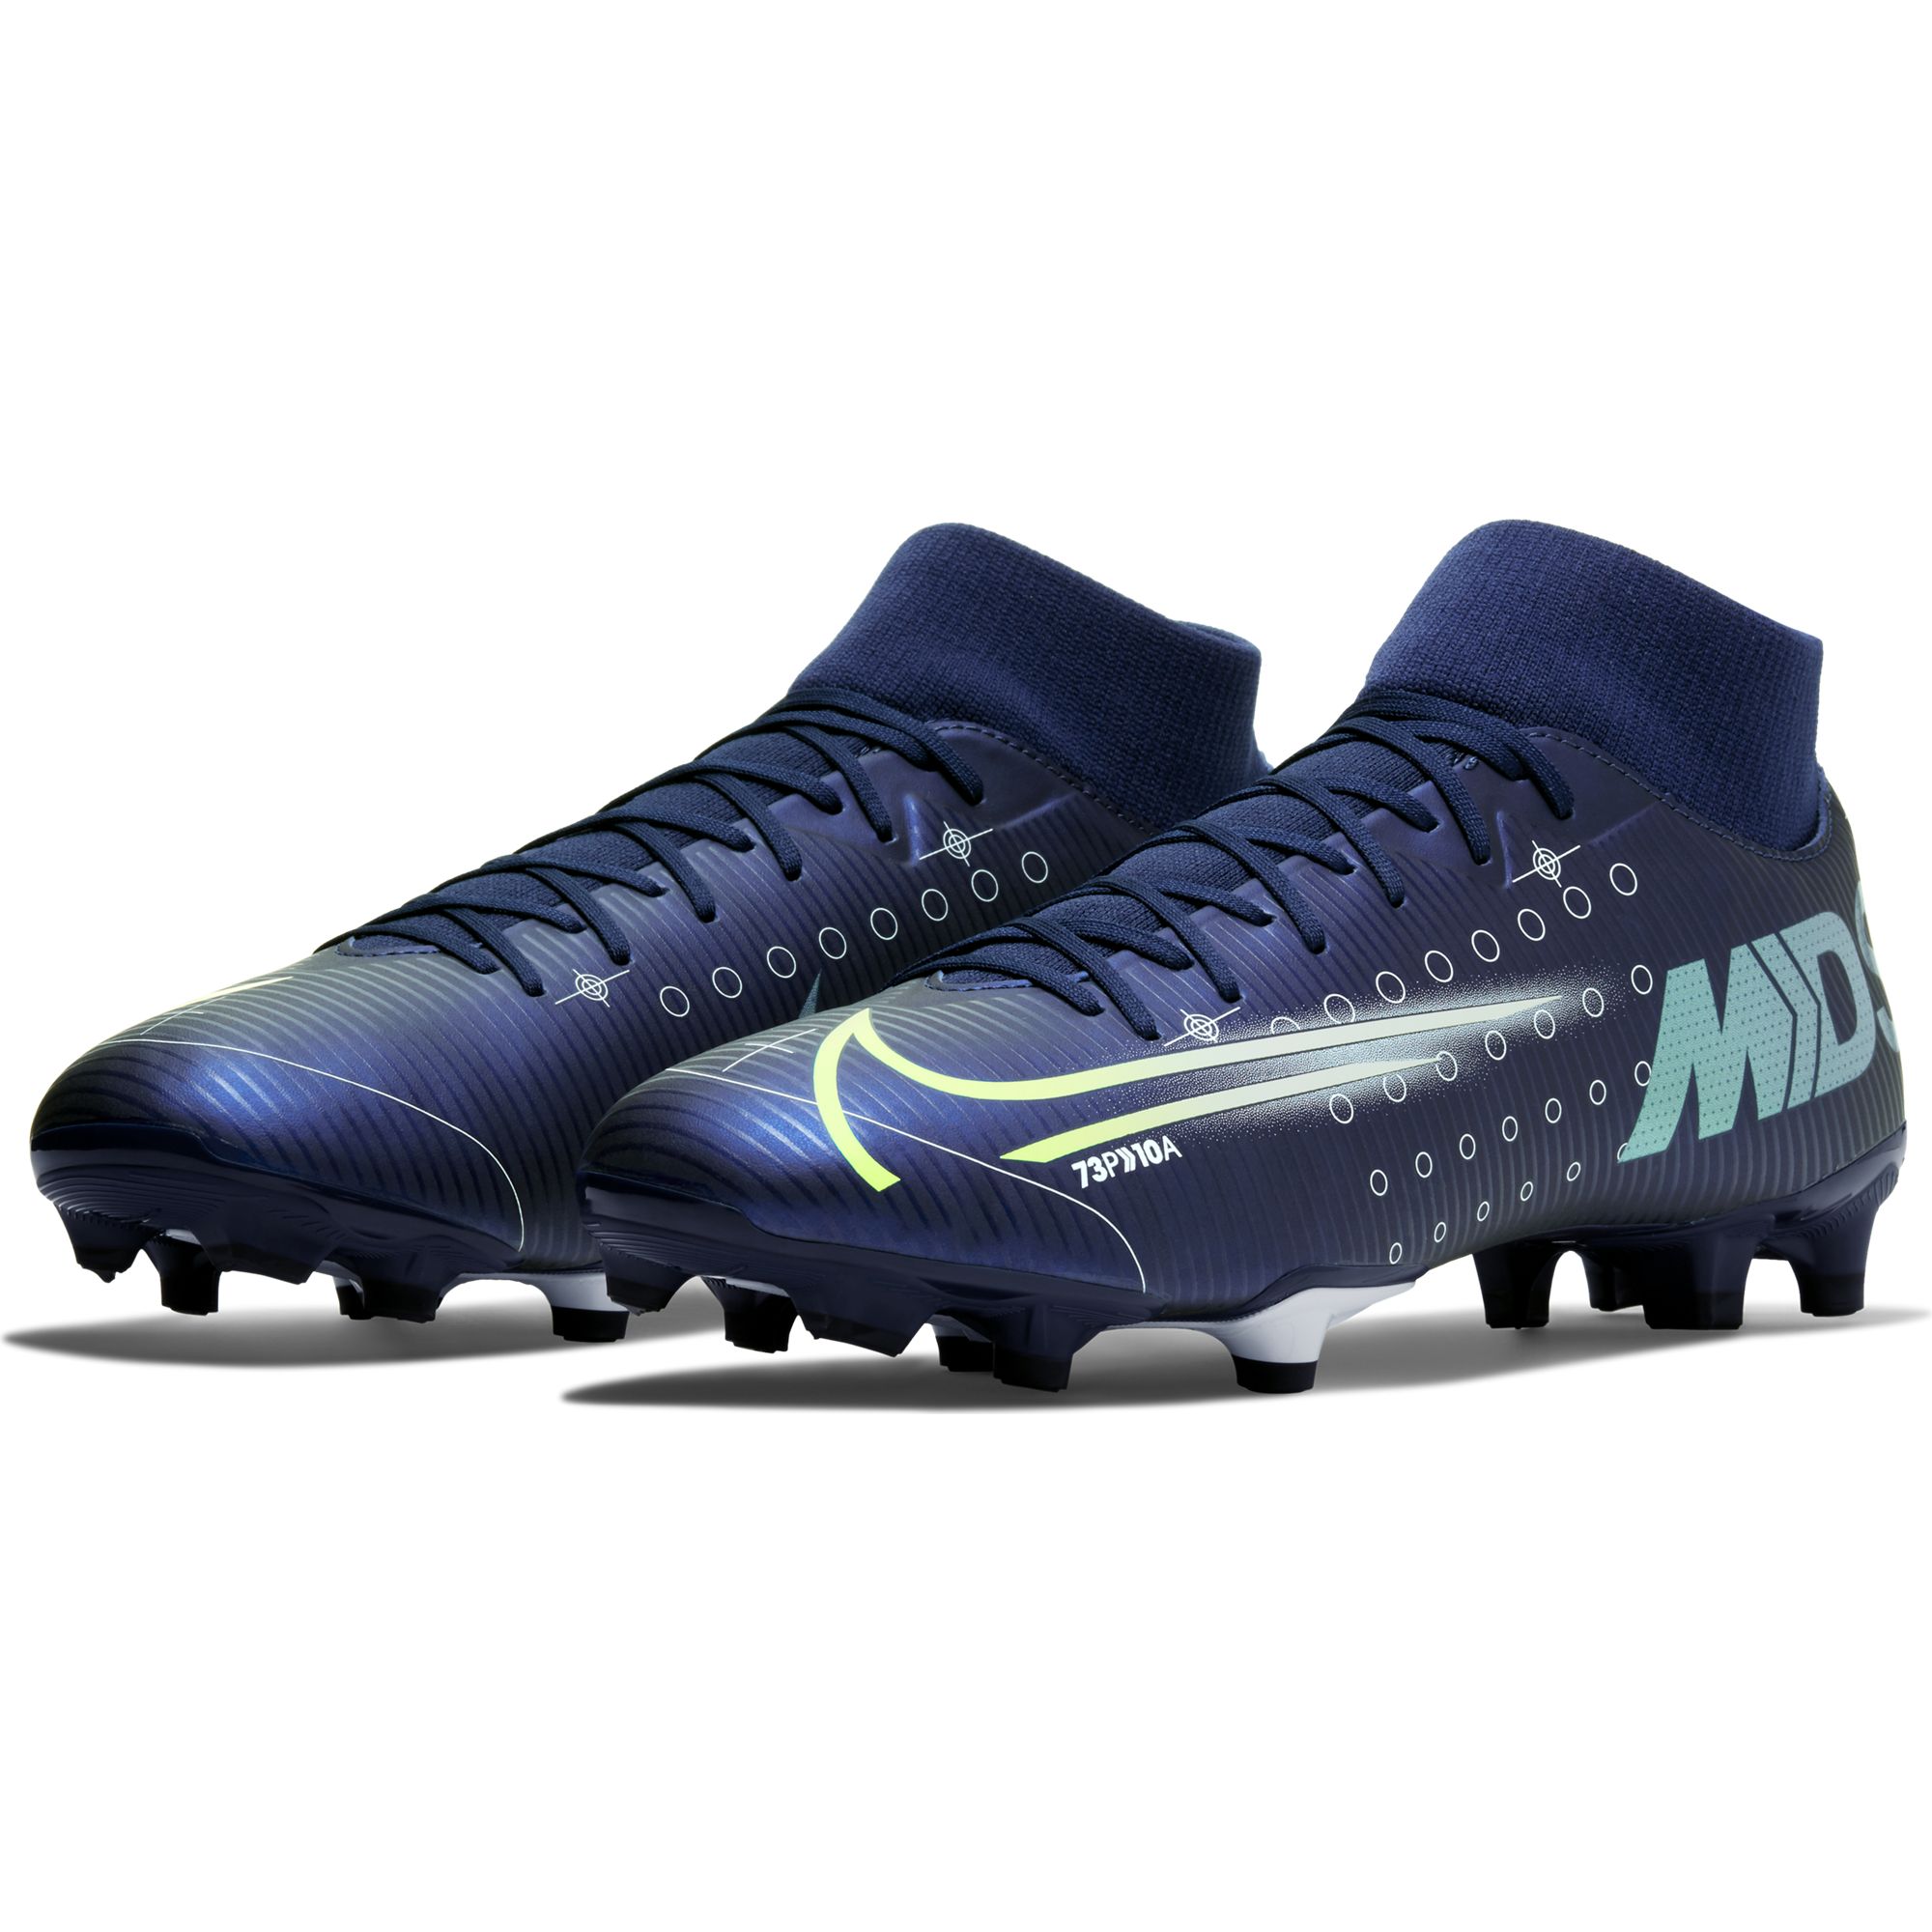 Nike Mercurial Superfly 7 Academy MDS MG Multi-Ground Soccer Cleat ...